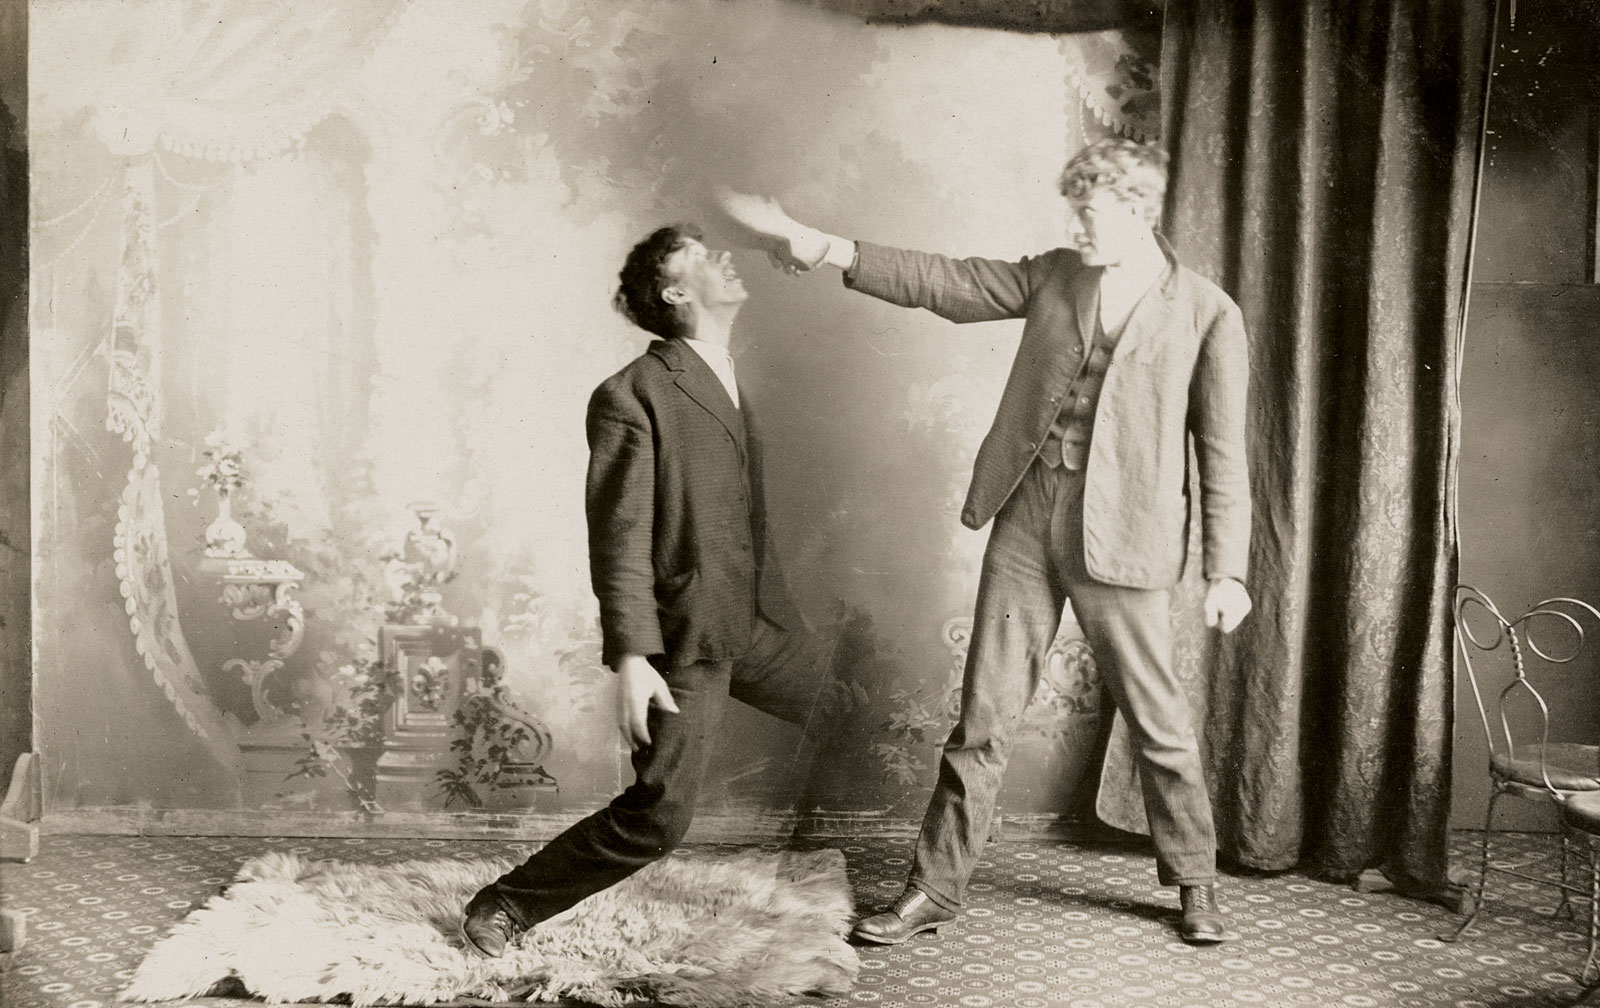 A man attempting to control his subject through hypnosis, nineteenth century